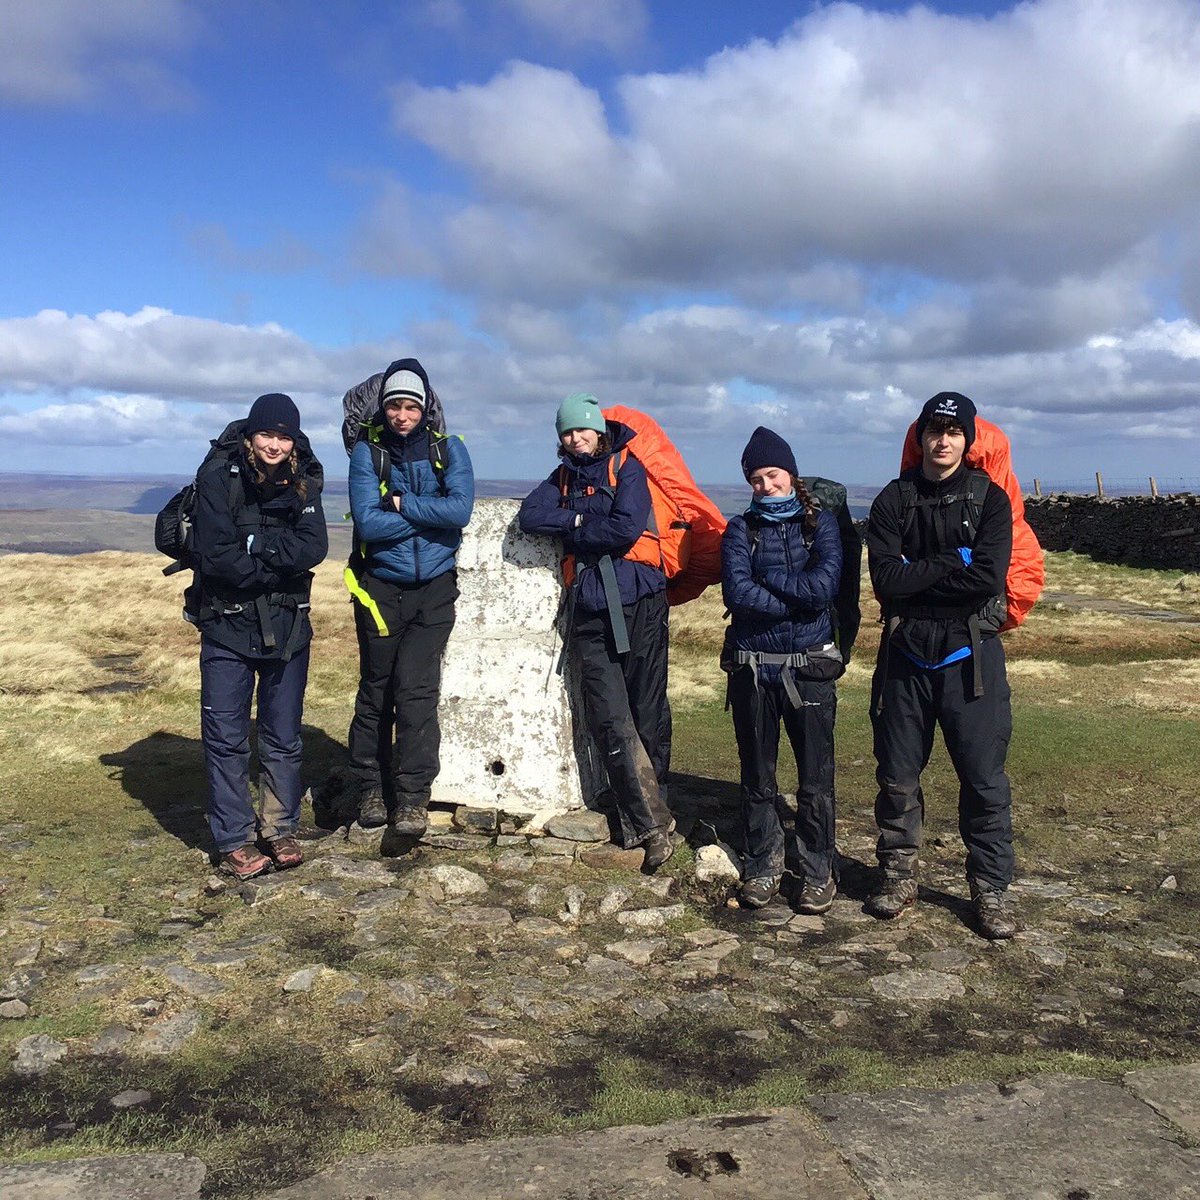 Over the past few days, pupils have been taking part in the DofE Gold Walking Practice Expedition to the Yorkshire Dales. Despite the tough conditions and intermittent showers it has been a successful trip and we look forward to hearing all about it when they return later today.